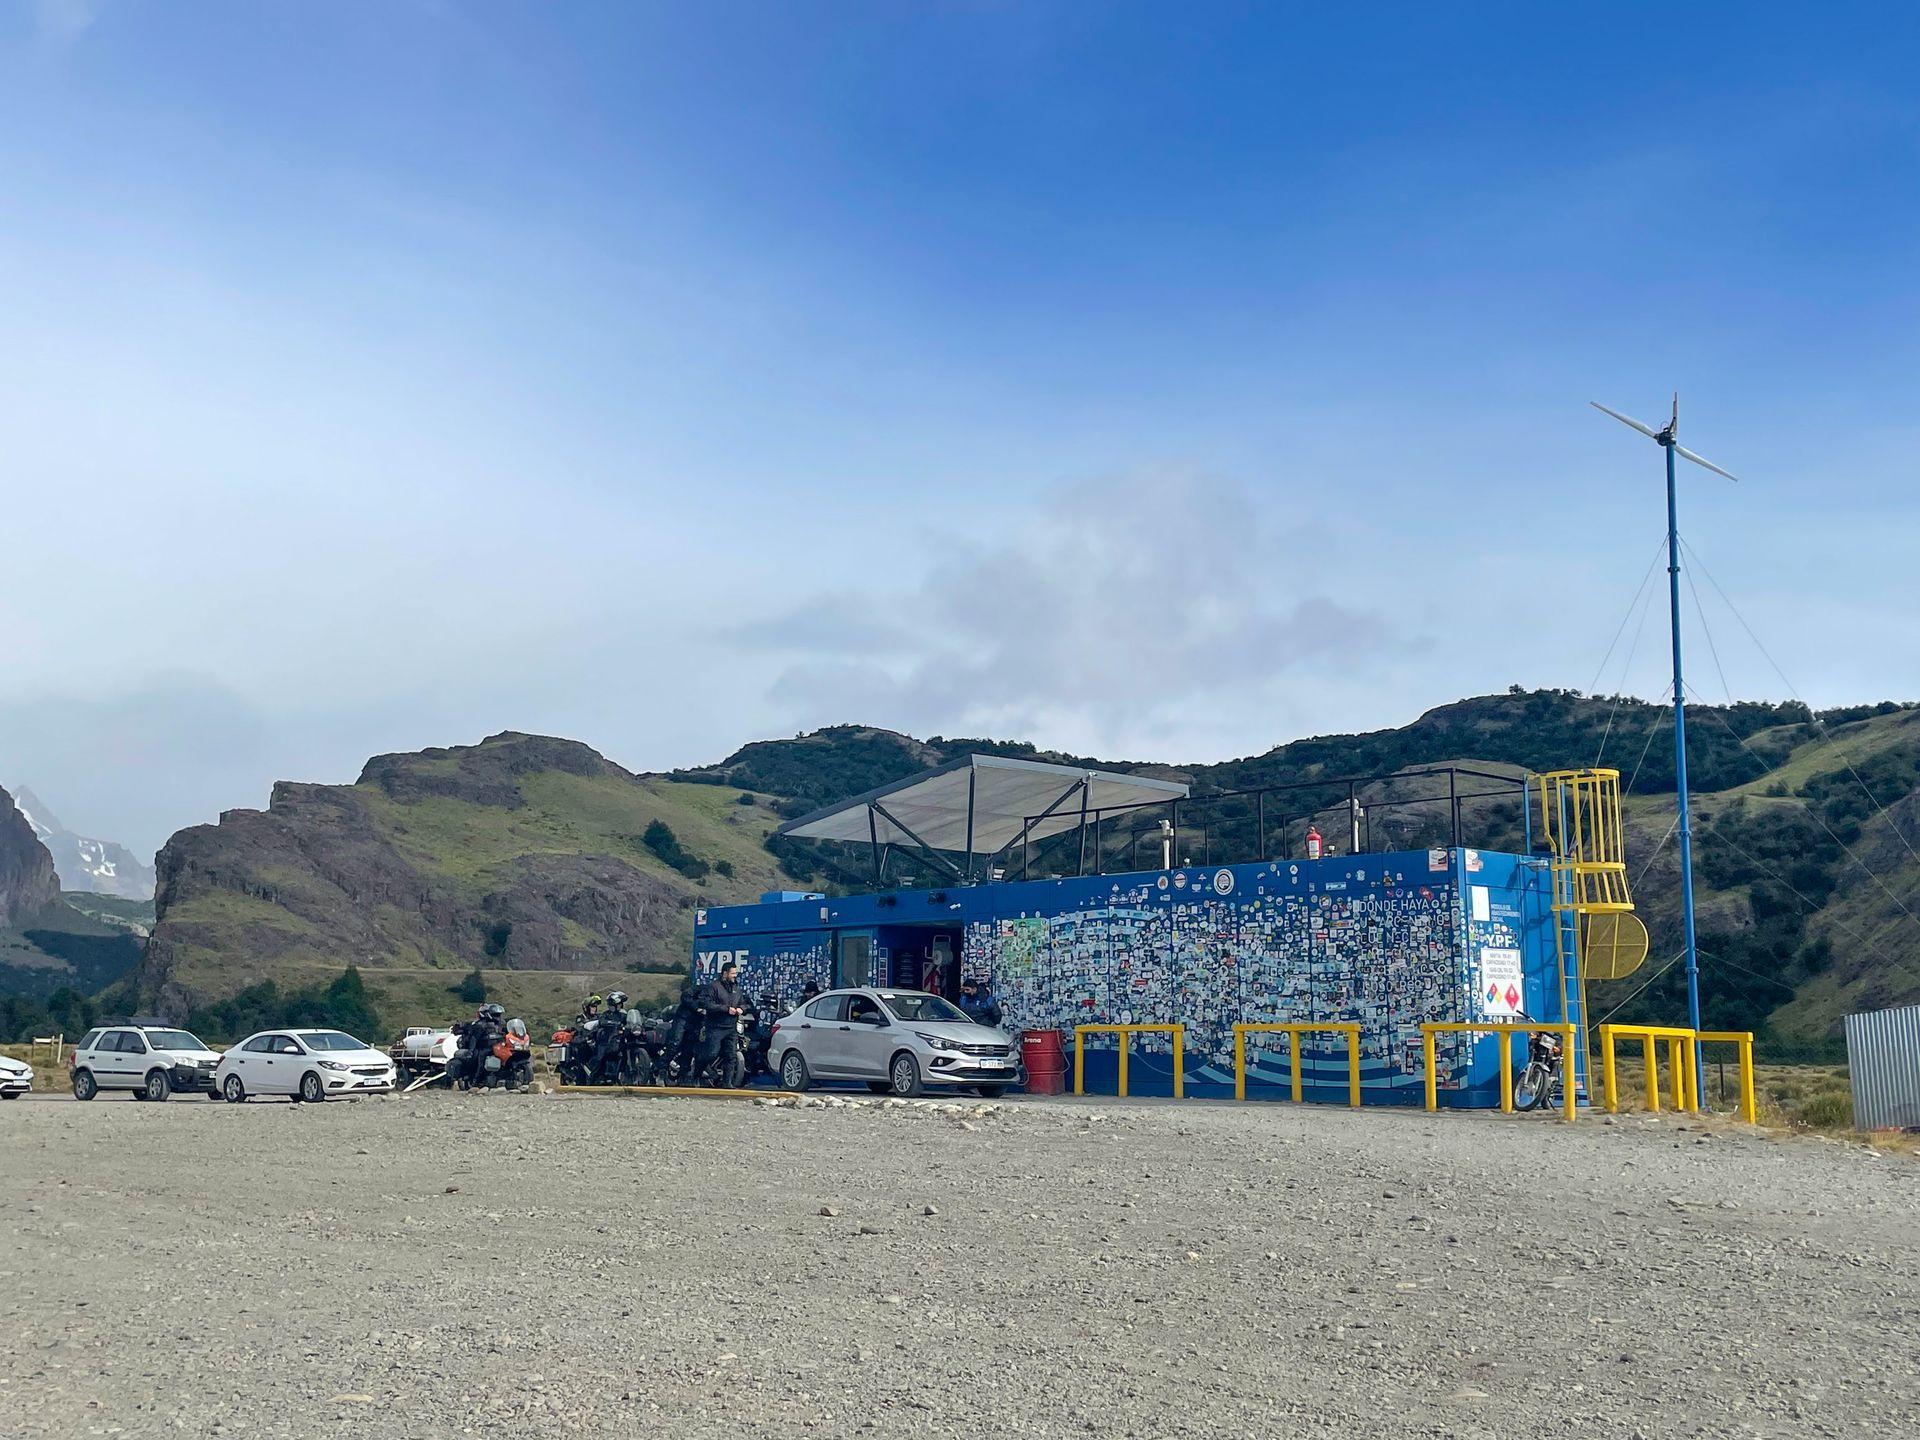 A line of cars and motorcycles at the one gas station in El Chalten. The gas station is a small blue building covered in stickers.